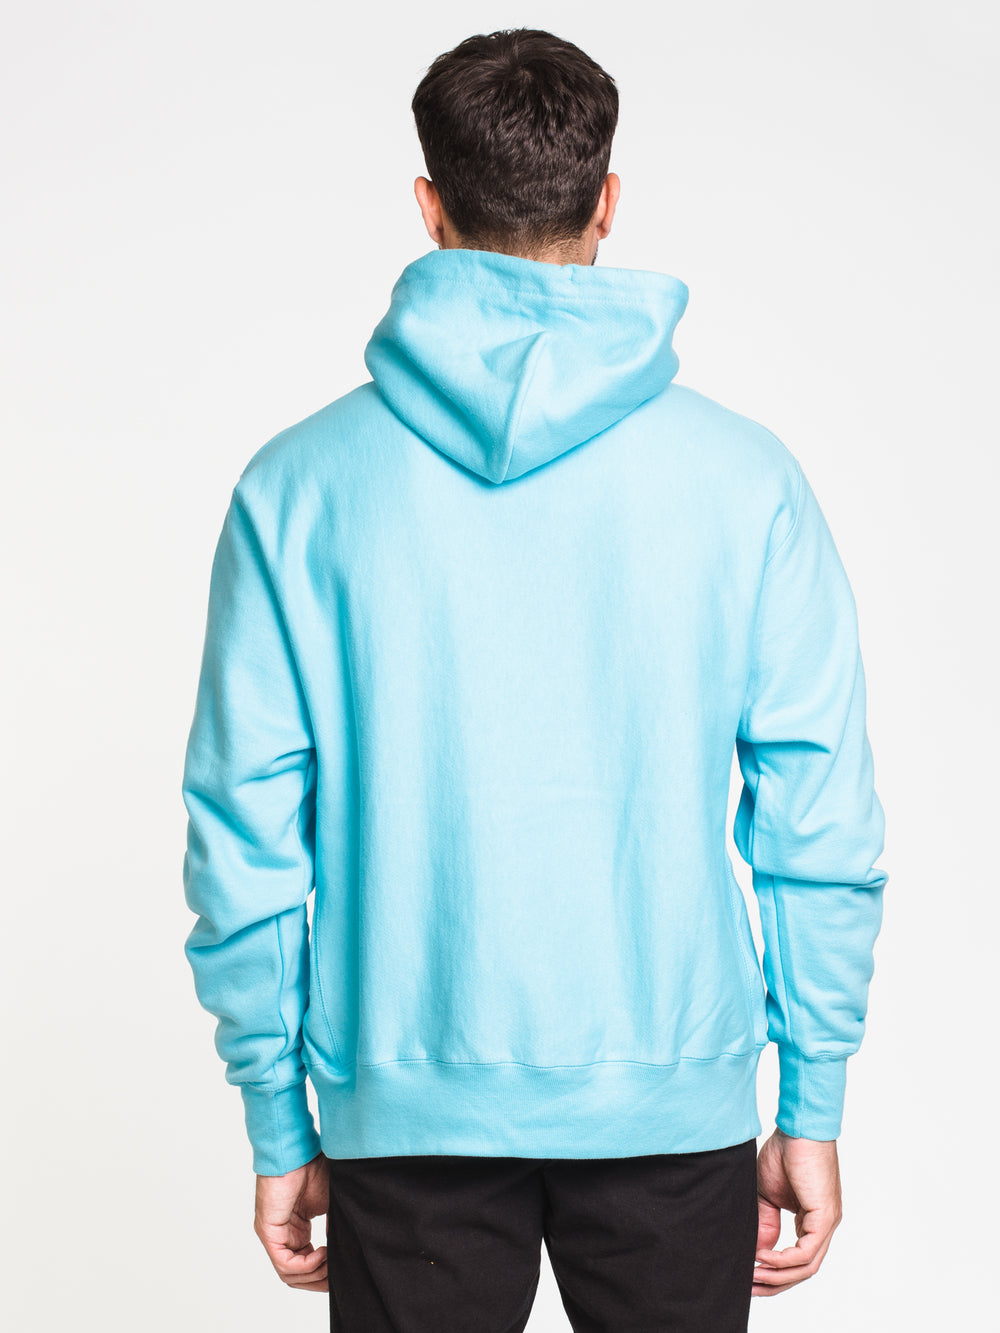 MENS RW SCREENED PULLOVER HOOD - BLUE - CLEARANCE